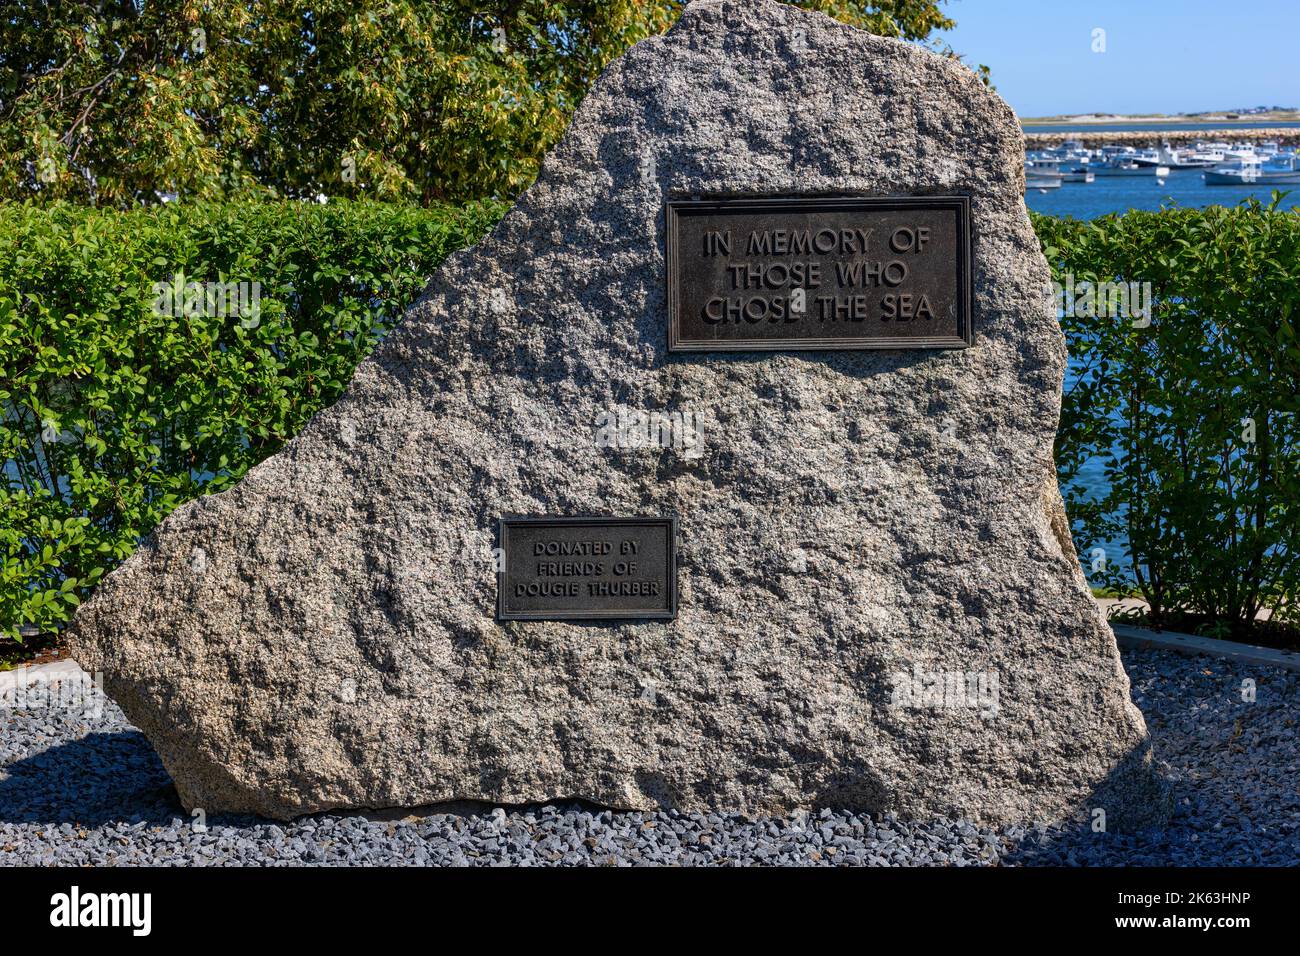 Plymouth, Massachusetts, USA - September 15, 2022: A memorial stone for Dougie Thurber who lost his life in a fishing accident and is also dedicated t Stock Photo